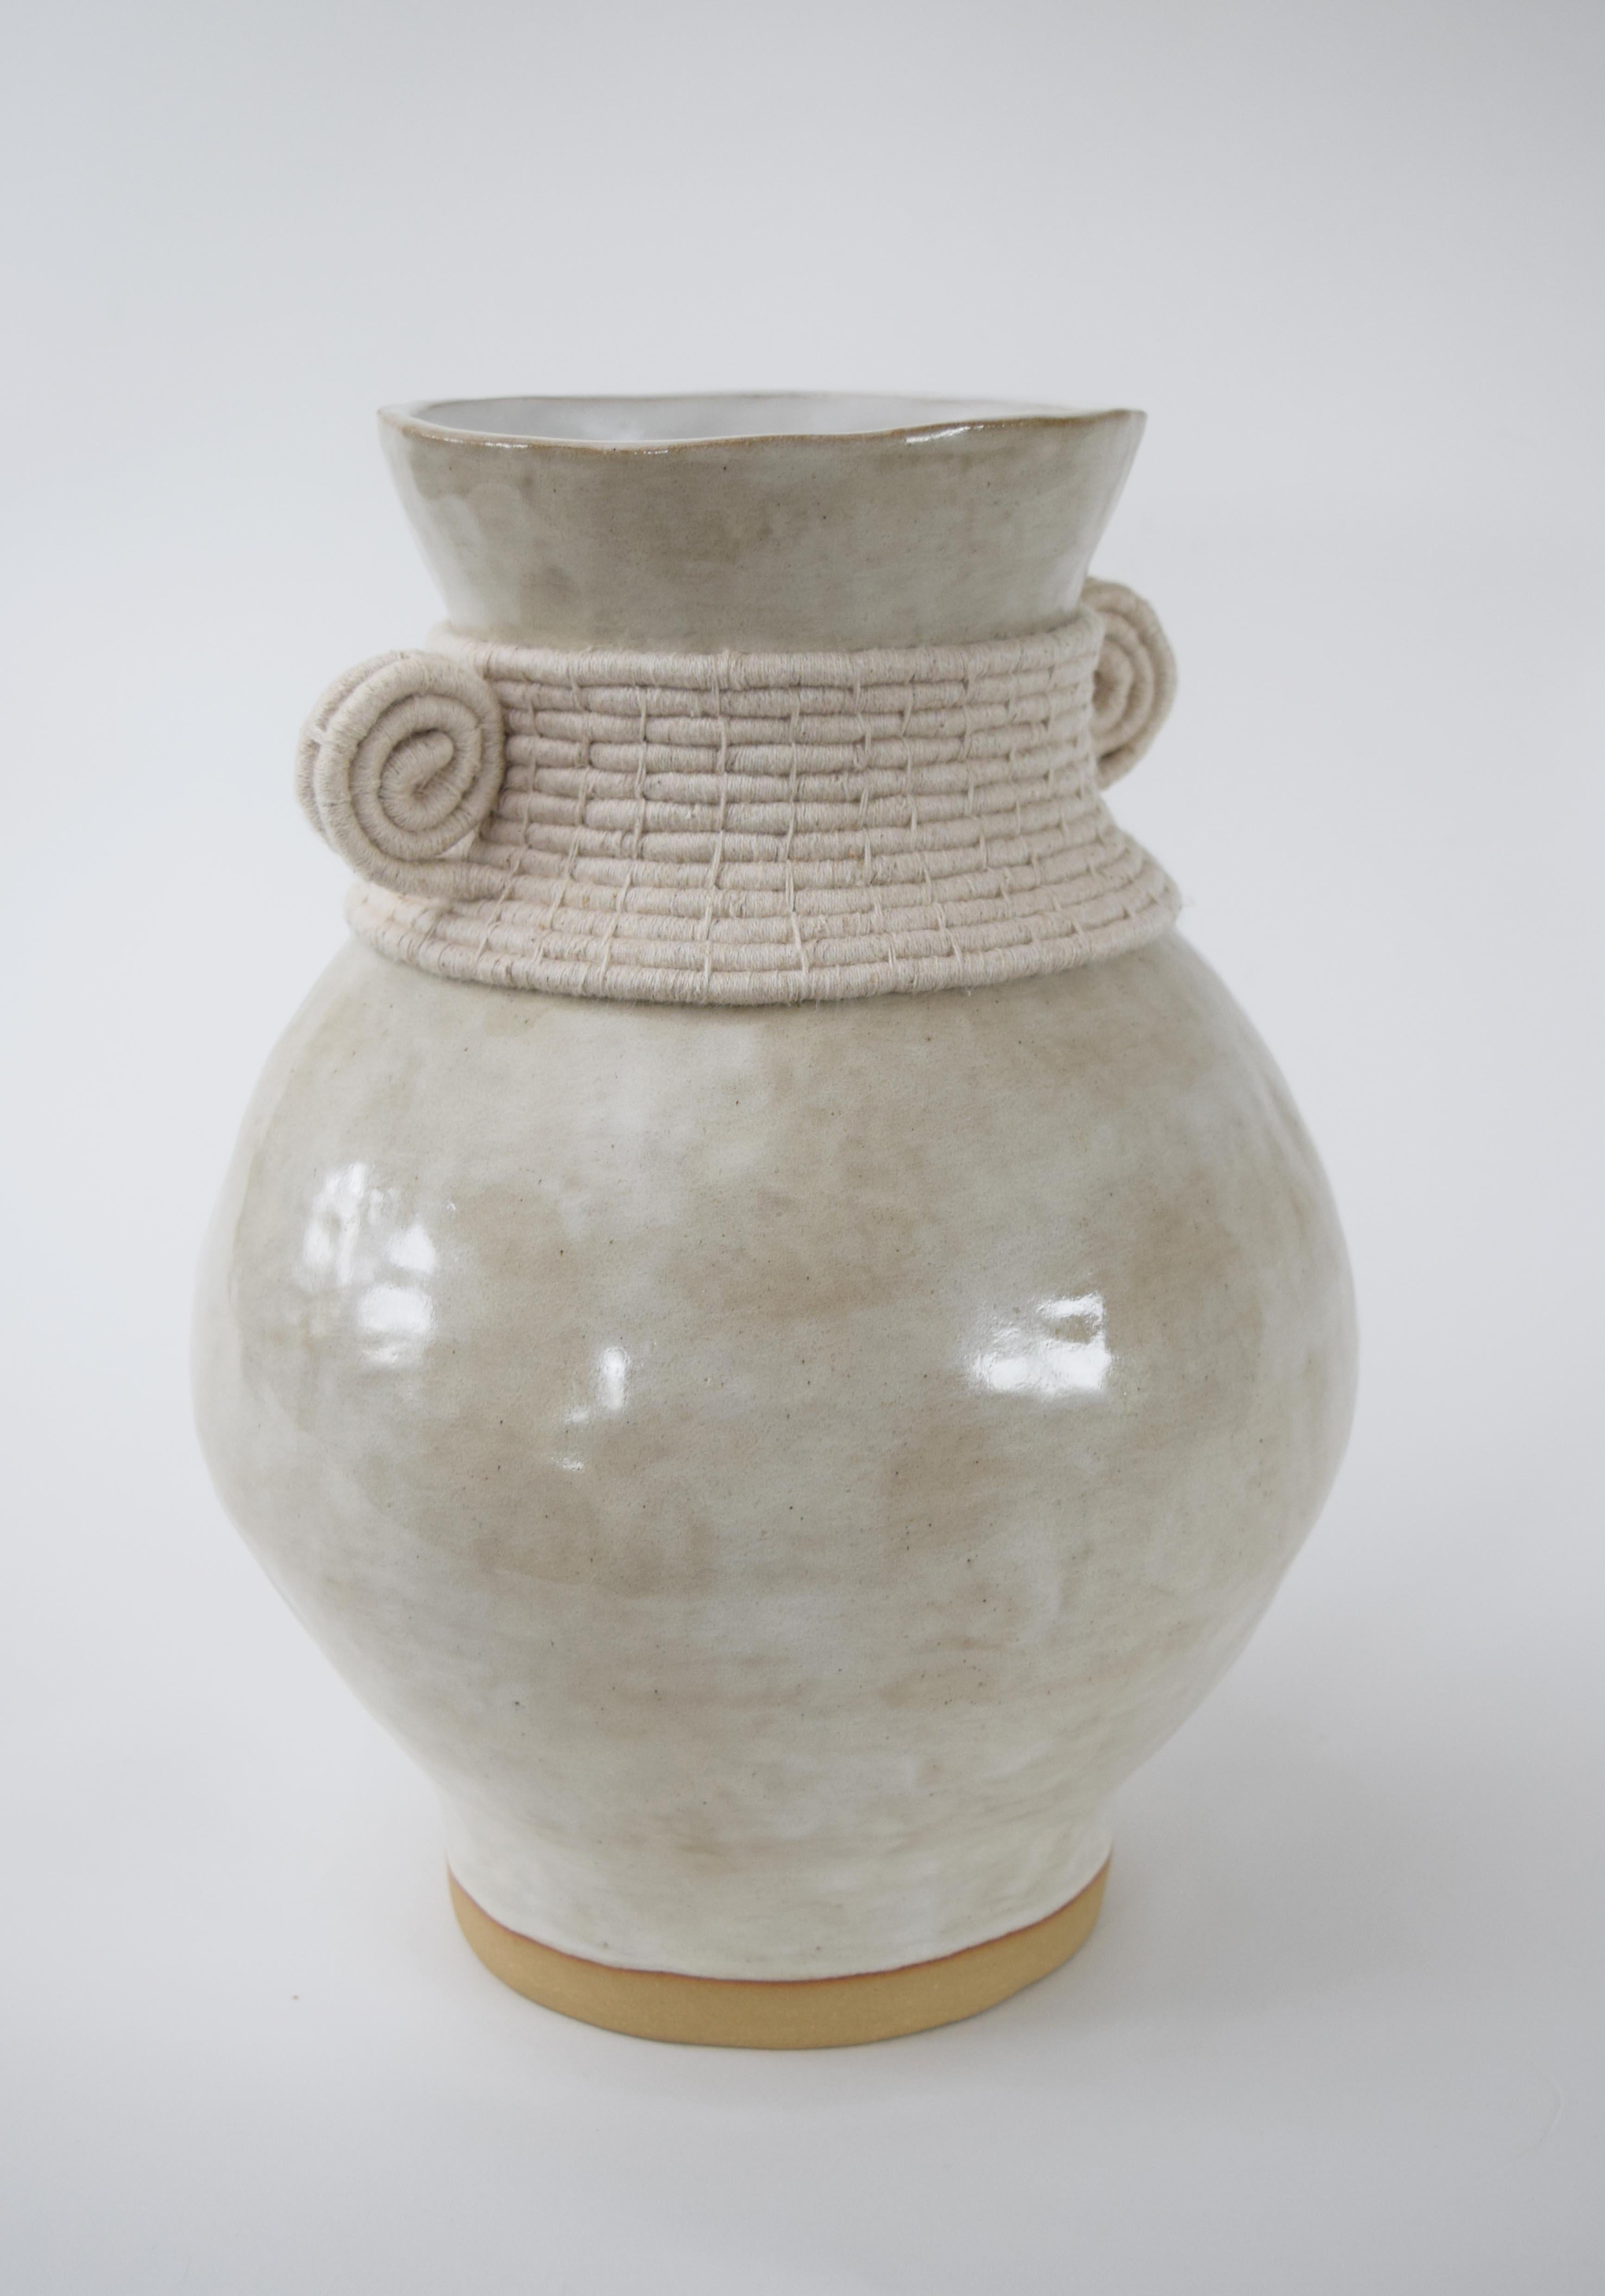 Vase #796 by Karen Gayle Tinney

Hand formed stoneware vase with off-white glaze. Woven off-white cotton detailing around the outside. The inside of the vase is glazed, the vase will hold water.

13”H x 9”W

Each piece is meticulously crafted by the